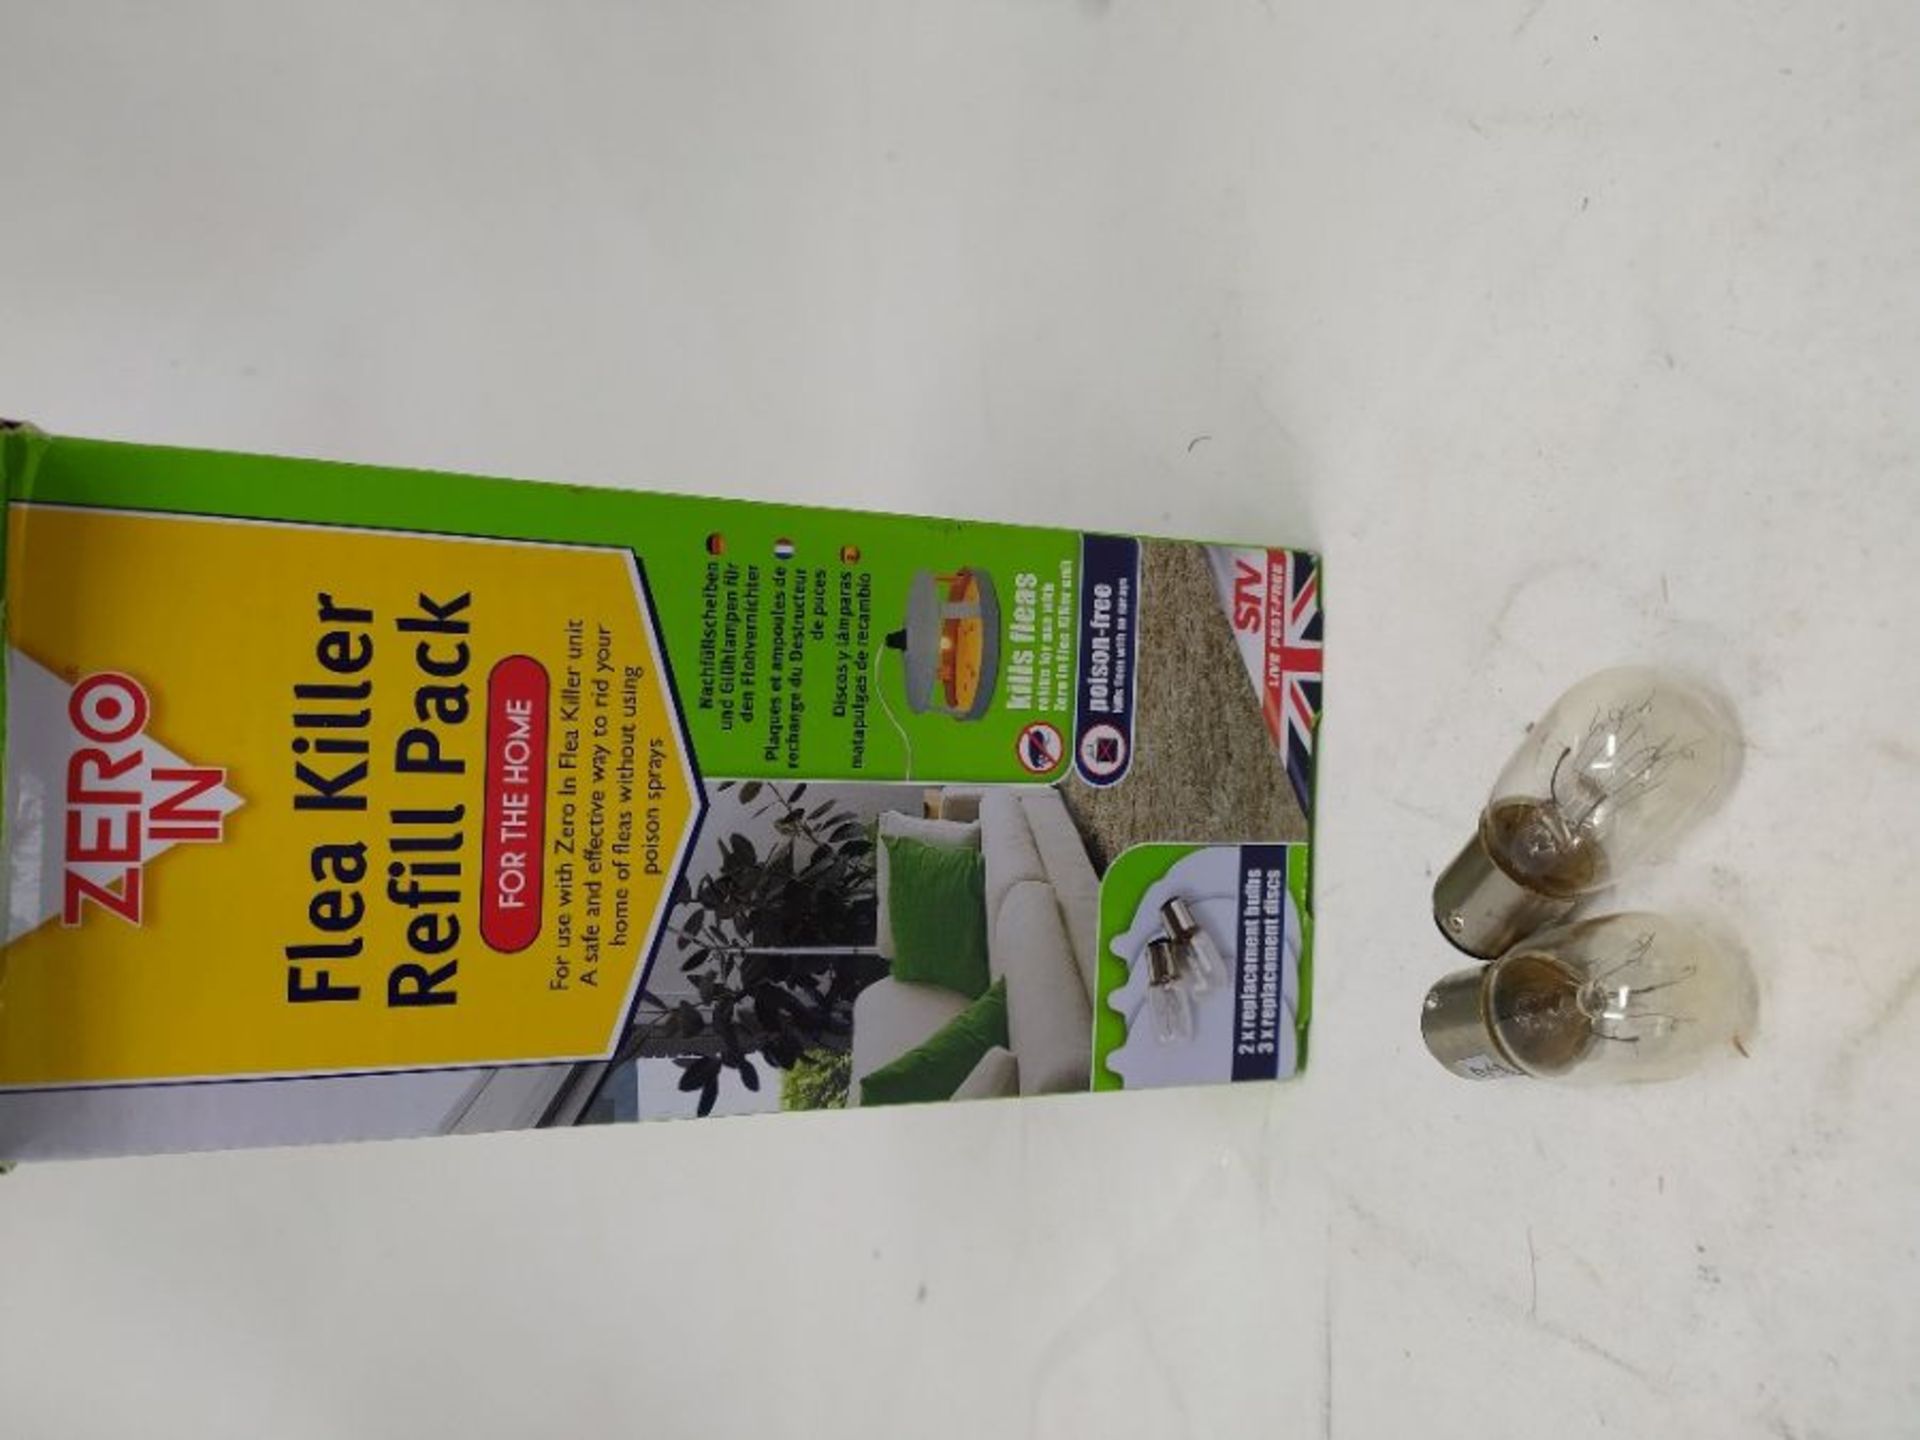 Zero In Flea Killer Refill Pack (3 Refill Discs and 2 Spare Lamps) - Image 2 of 2